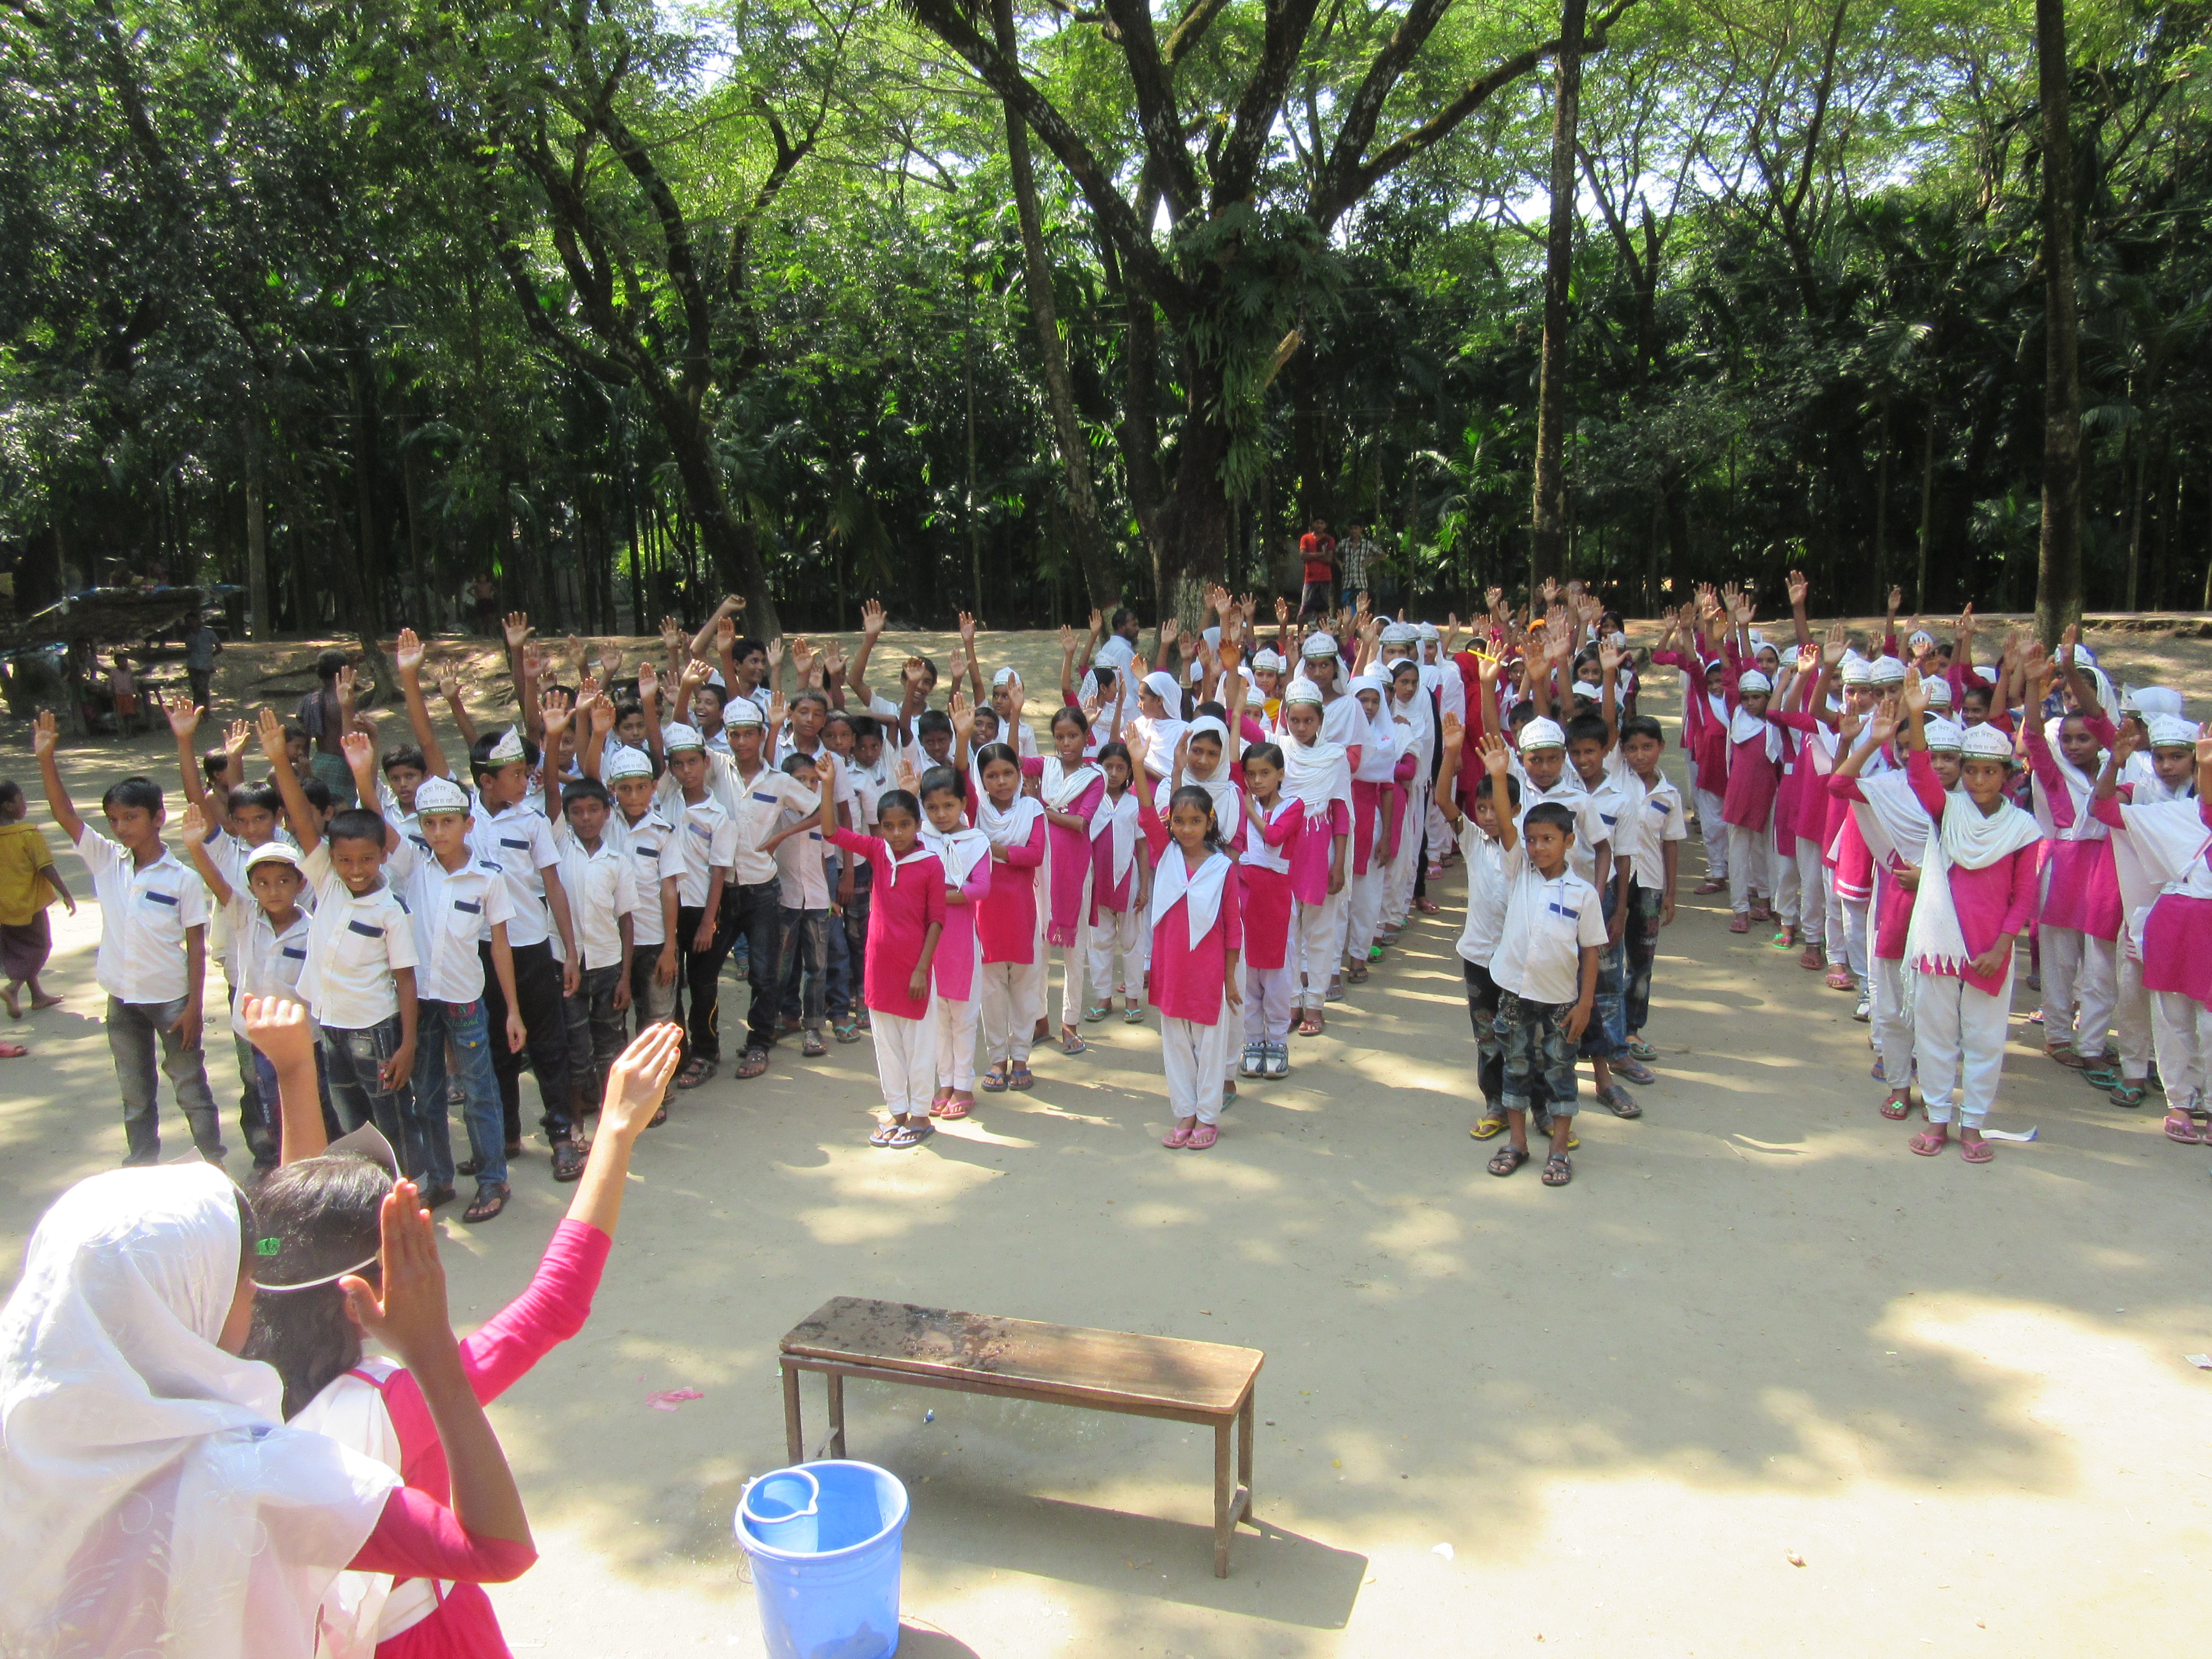 Several lines of children with hands up responding to their teacher